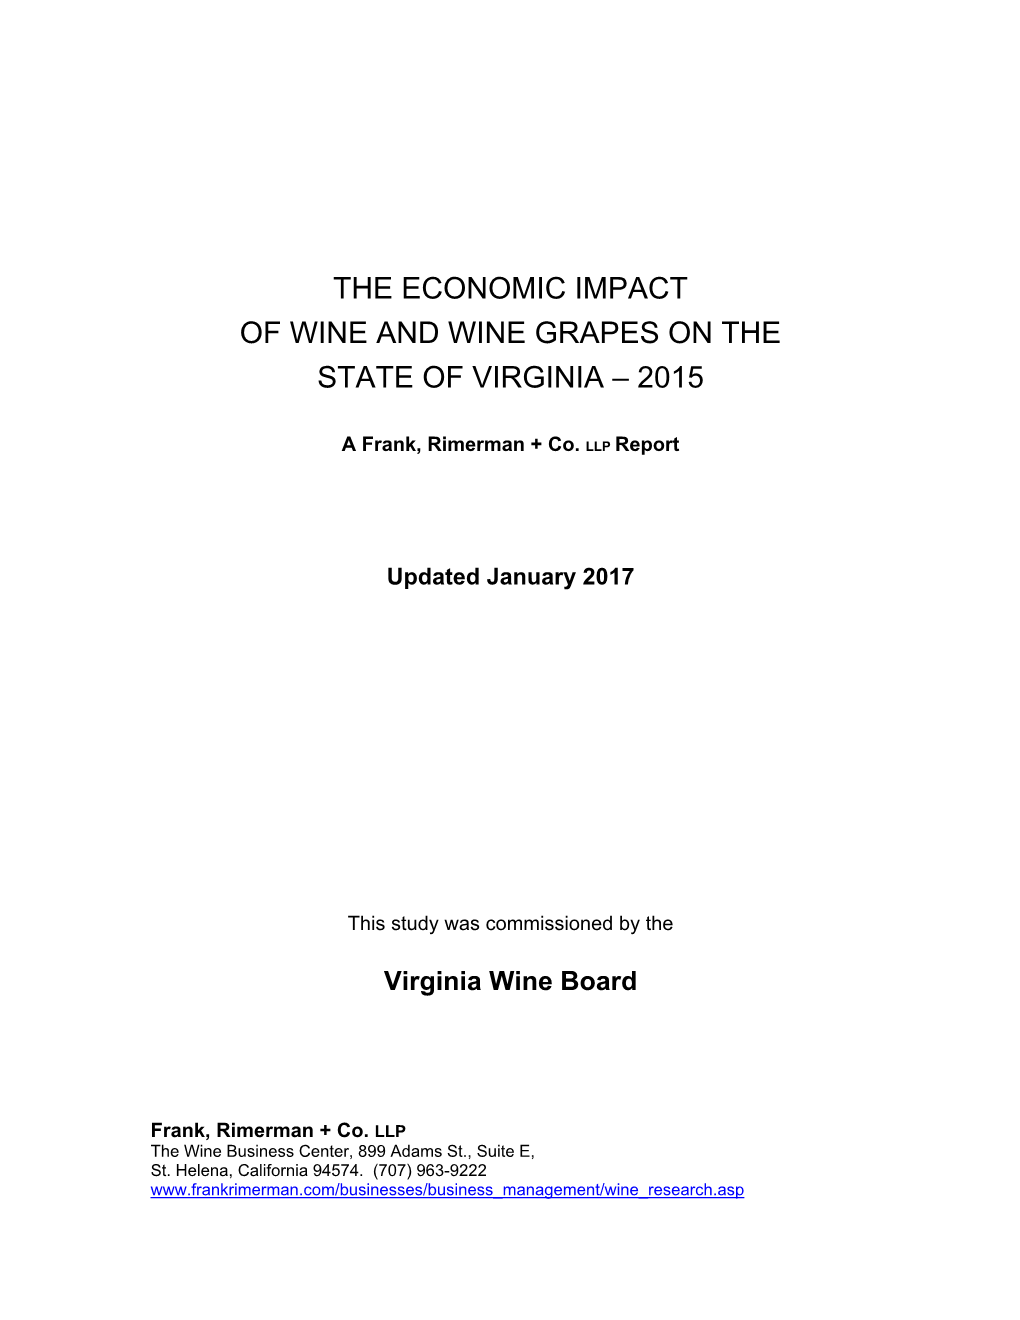 The Economic Impact of Wine and Wine Grapes on the State of Virginia – 2015